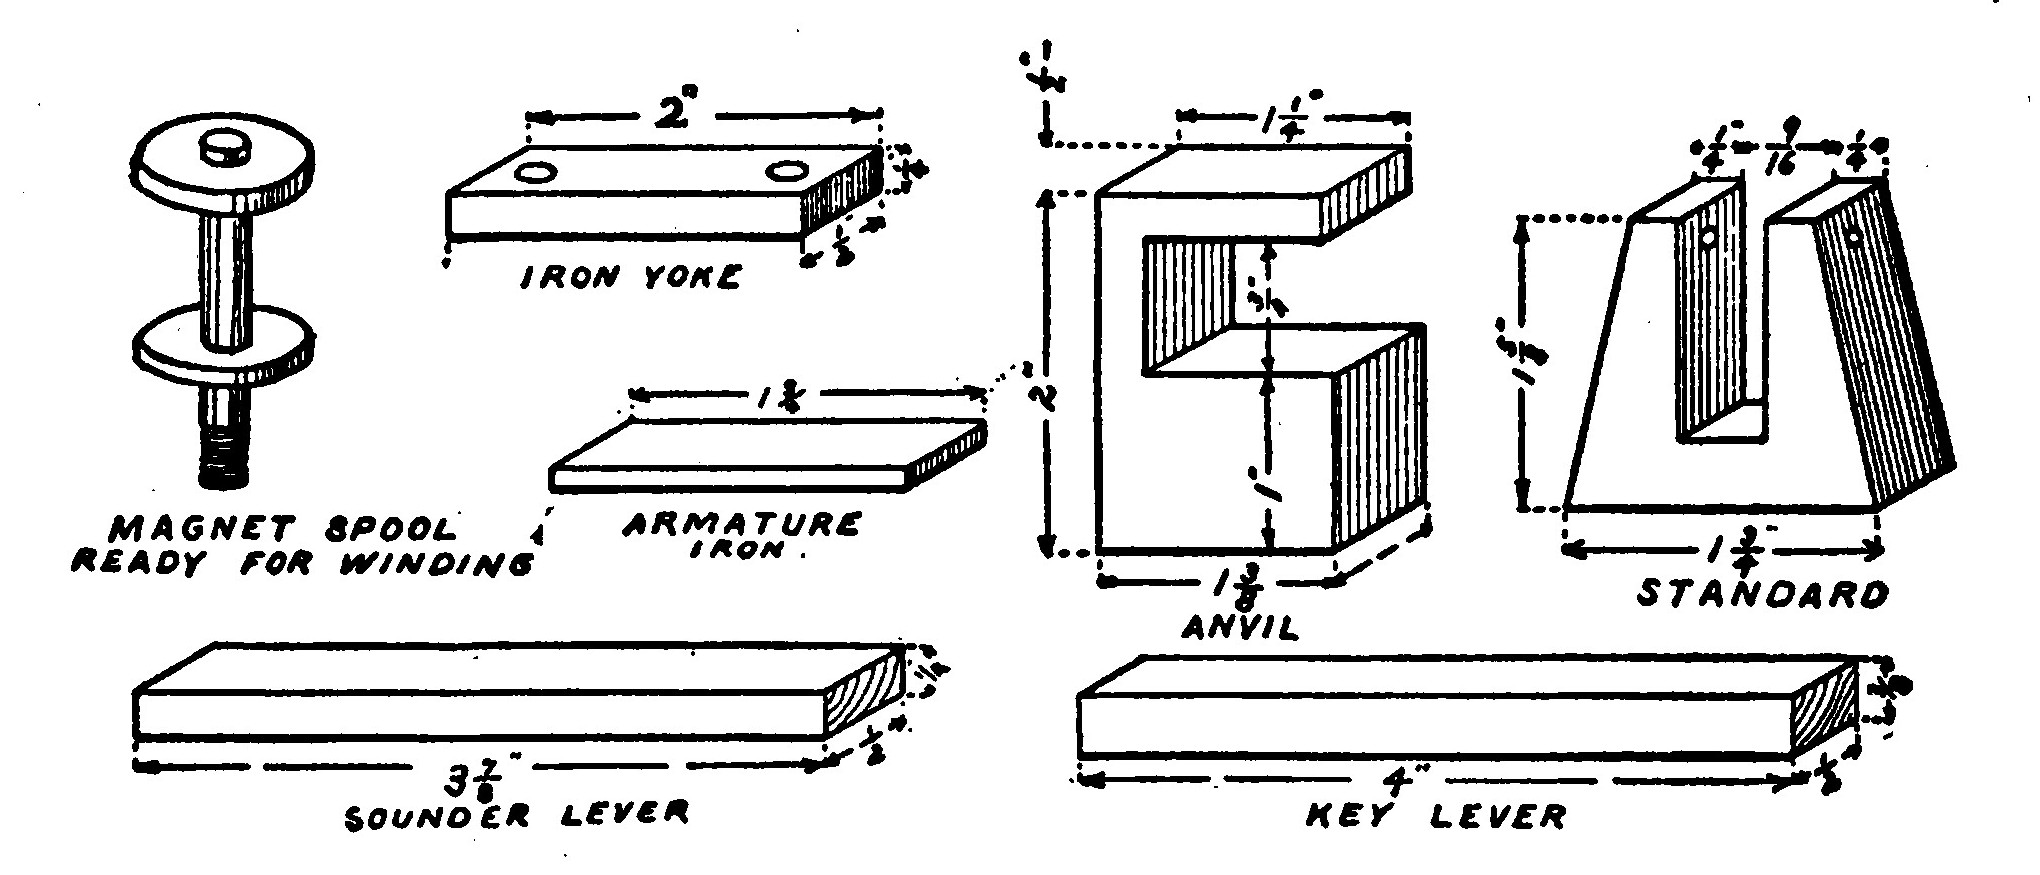 Fig. 136.—Details of the Telegraph Set shown in Figure 135.